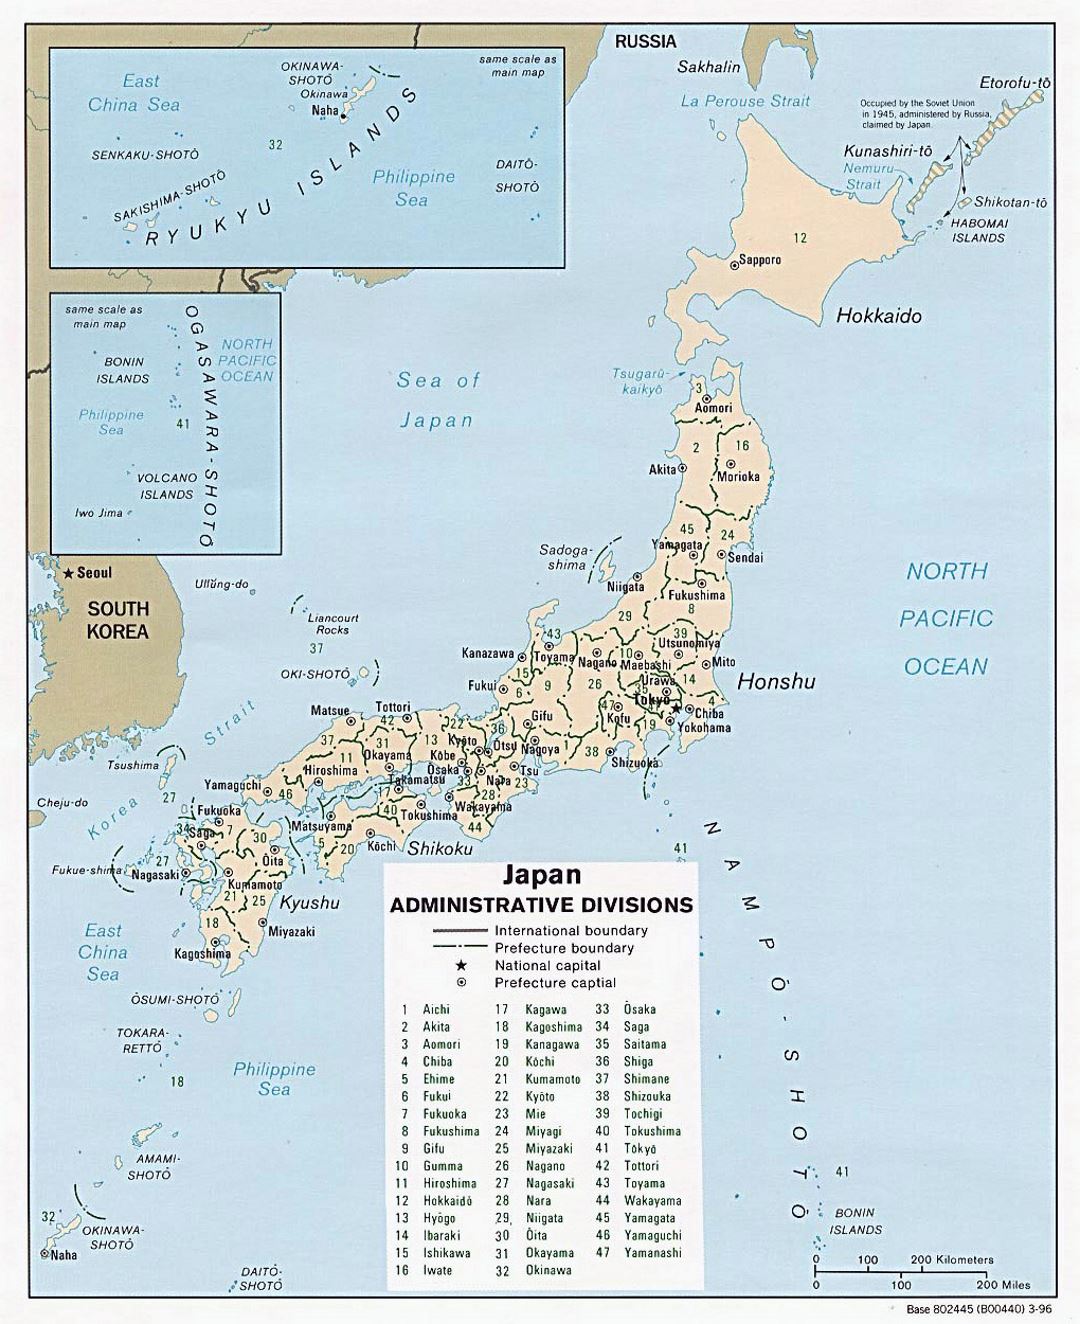 Detailed administrative divisions map of Japan - 1996